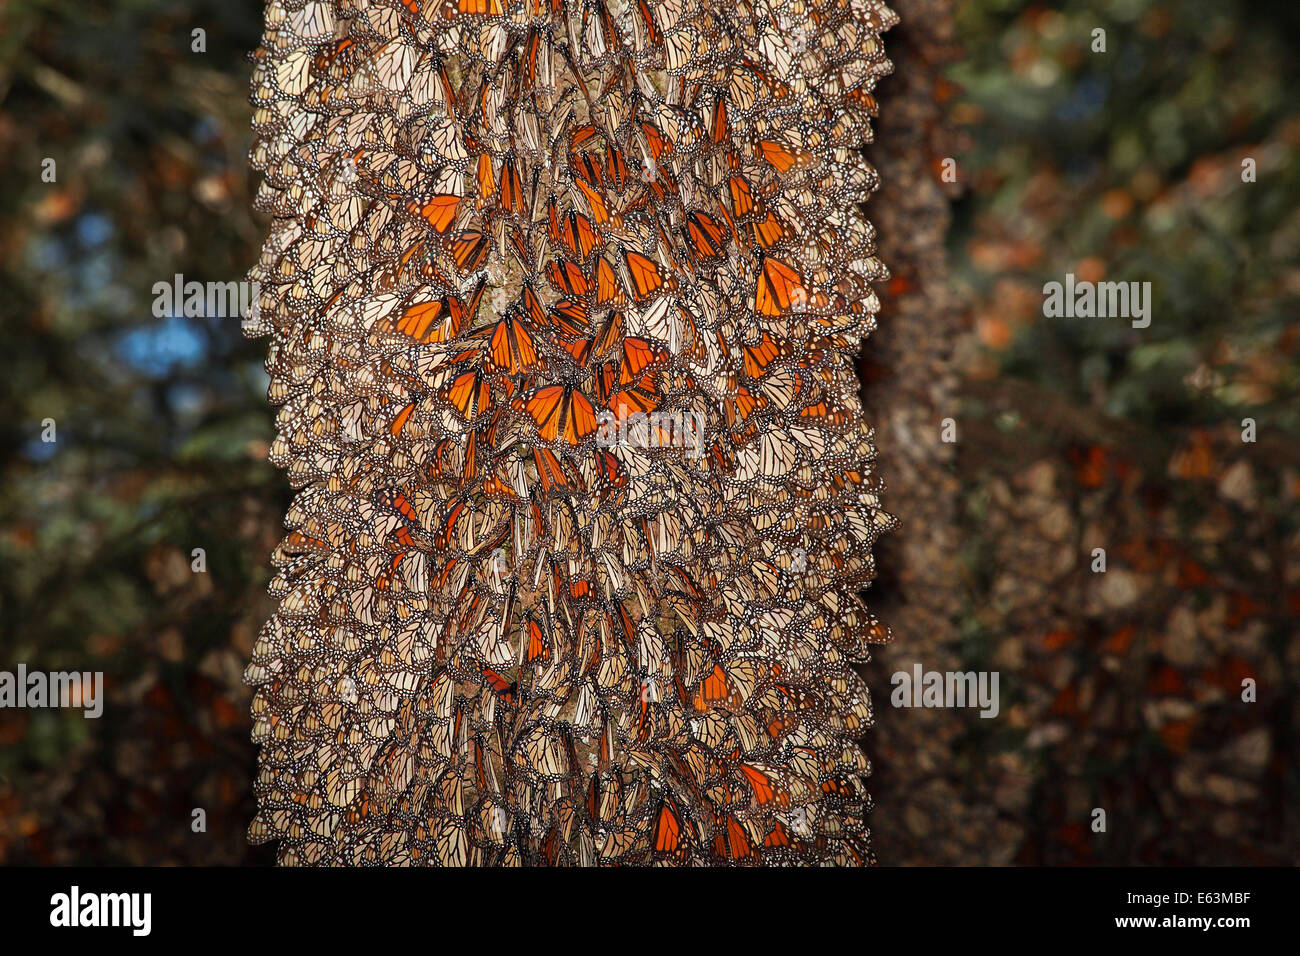 Tree Full of Monarch Butterflies at the Rosario Sanctuary, Michoacan, Mexico Stock Photo